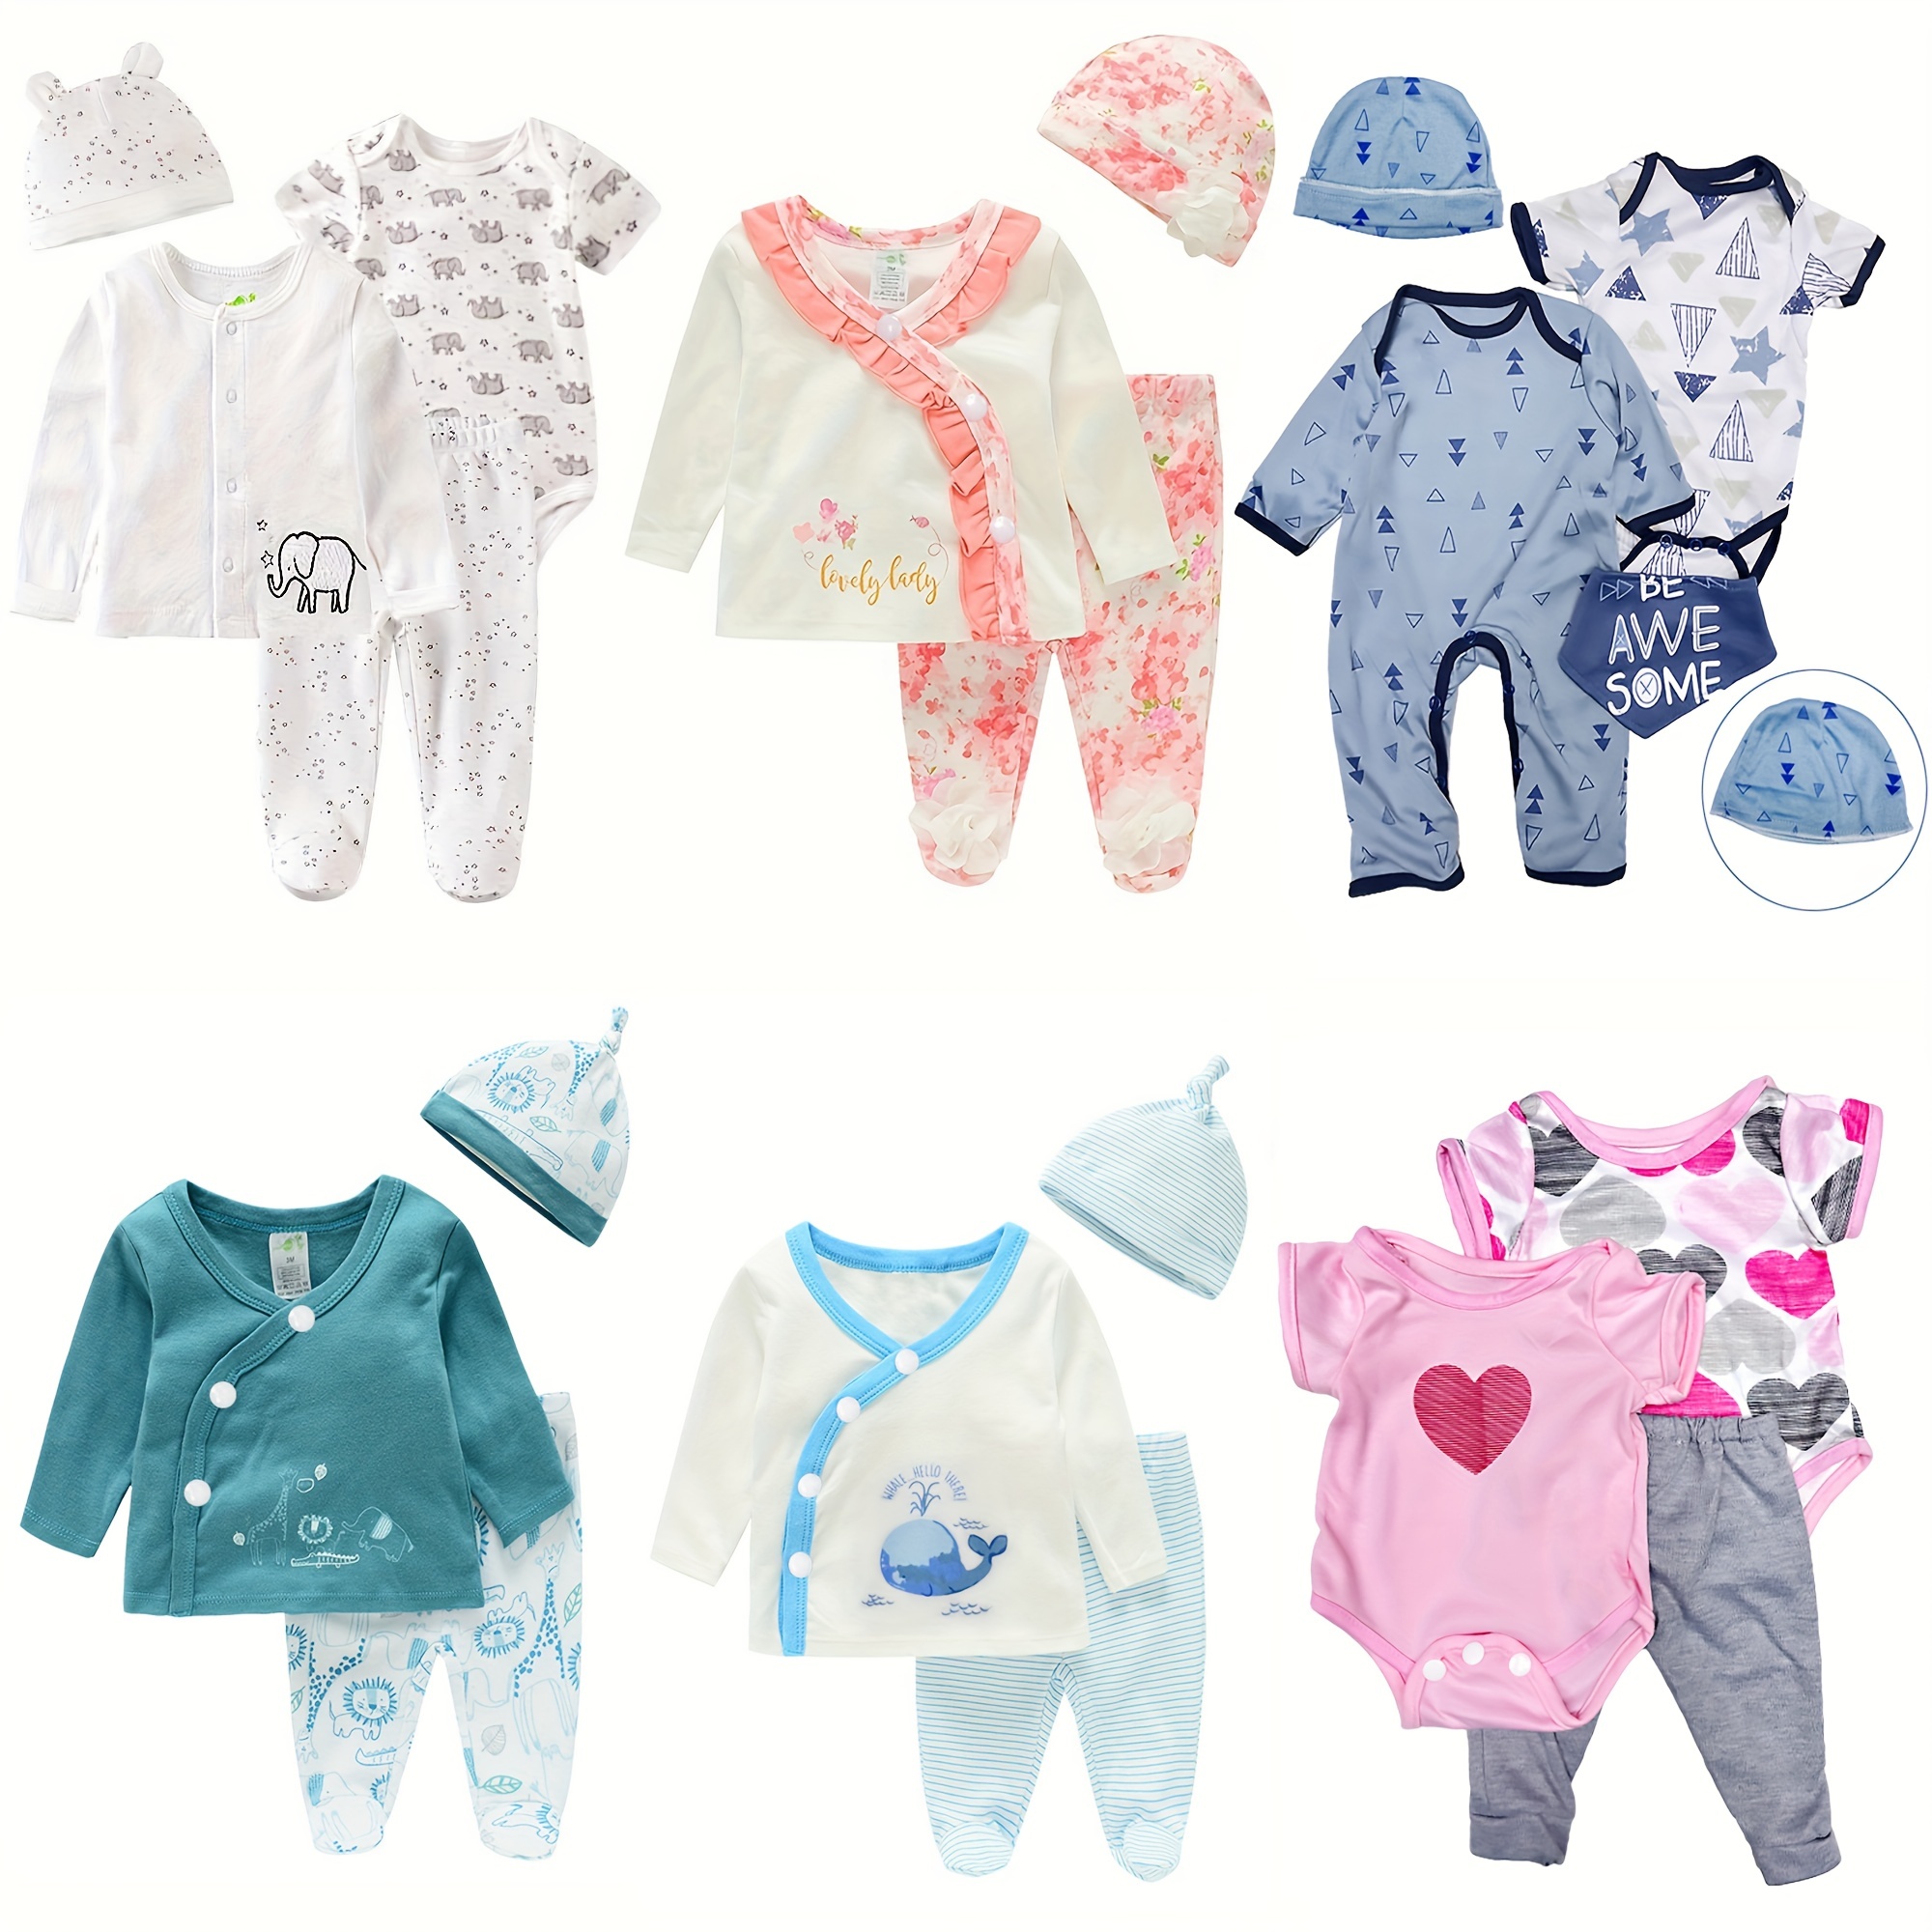  Reborn Baby Dolls Clothes Boy Blue Outfits for 20- 22 Reborn  Doll Boy Clothing : Toys & Games